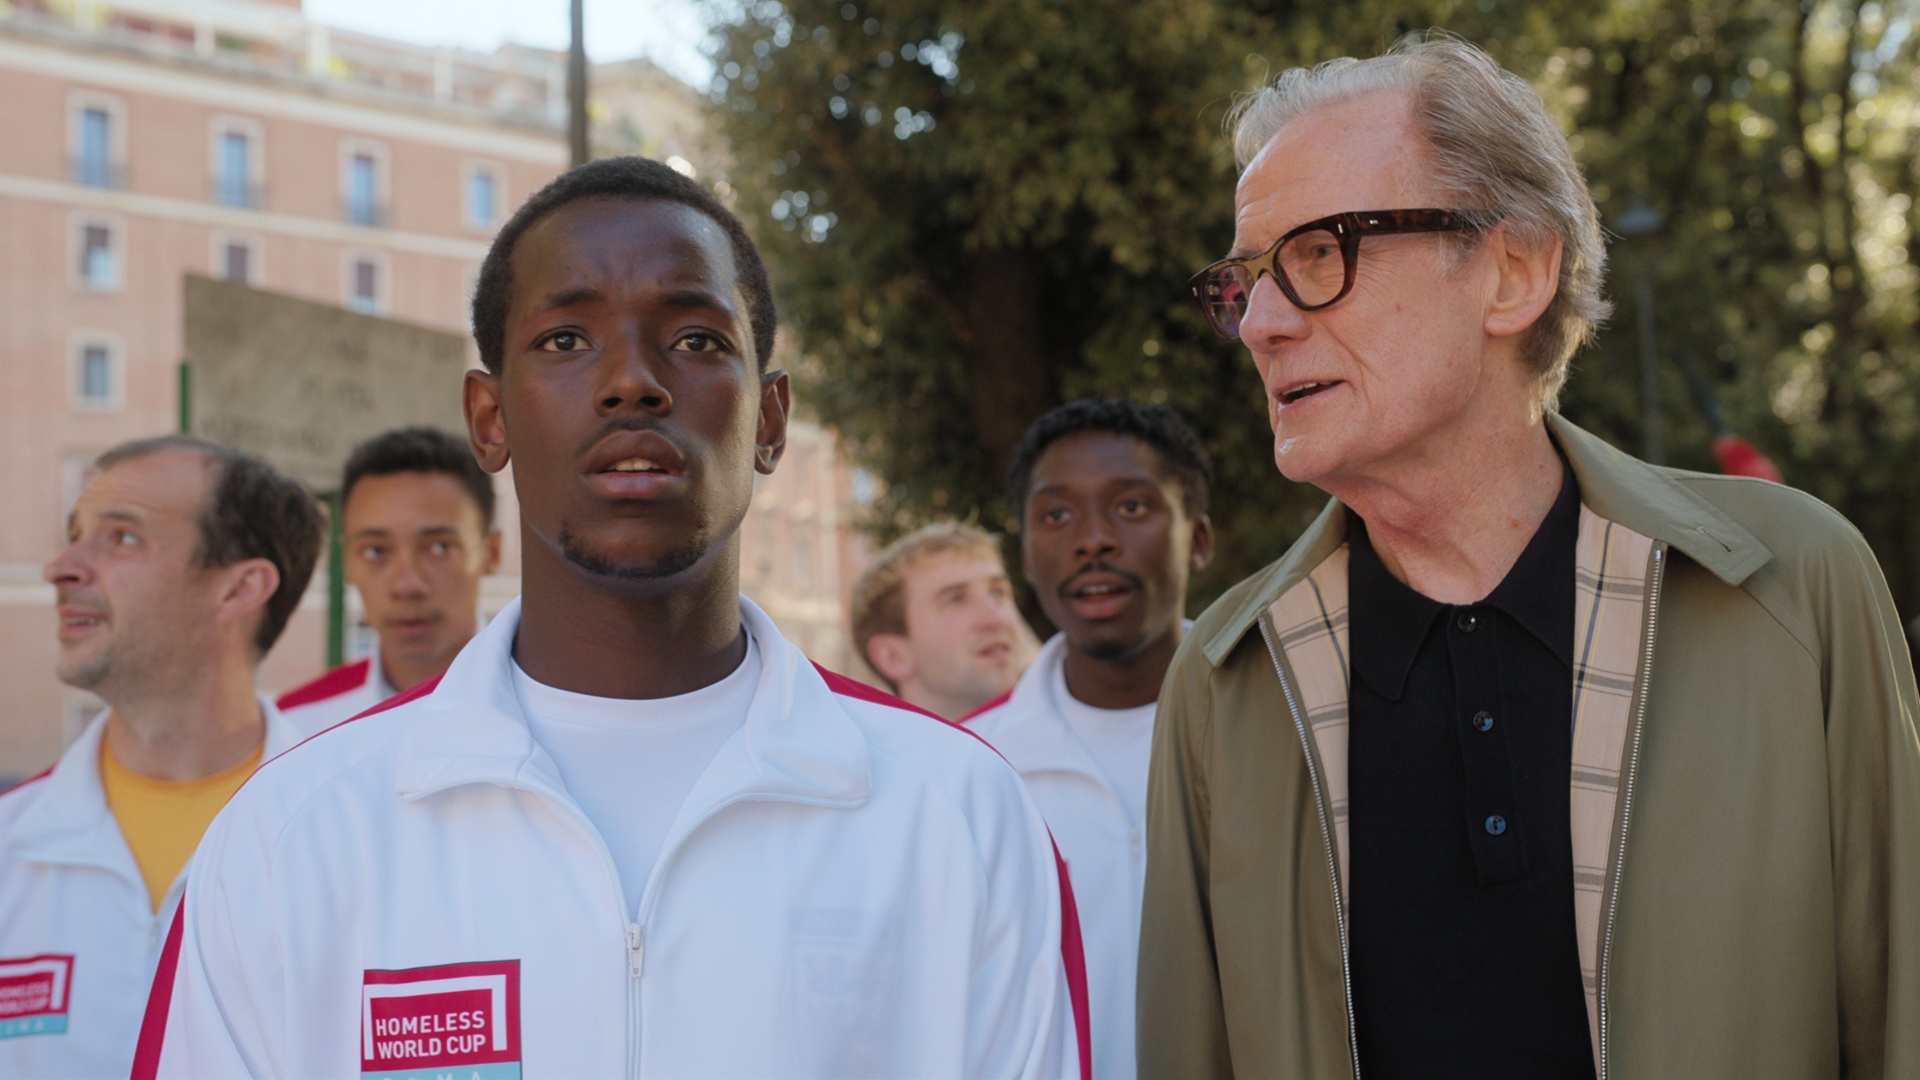 Micheal Ward and Bill Nighy in The Beautiful Game